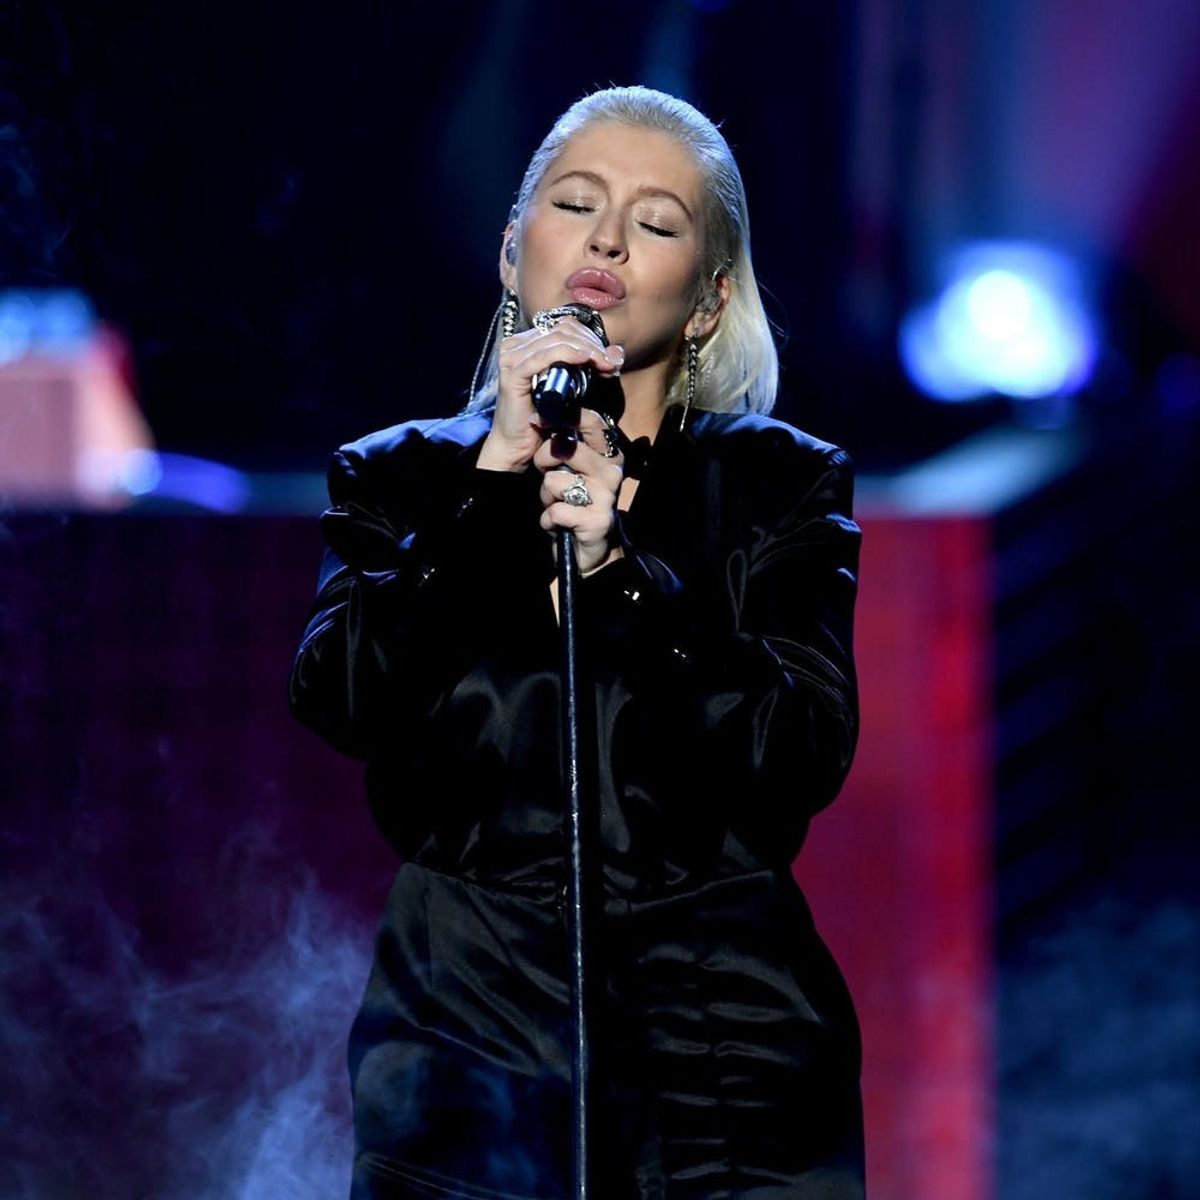 Christina Aguilera Pays Tribute to Whitney Houston and “The Bodyguard” at the 2017 AMAs